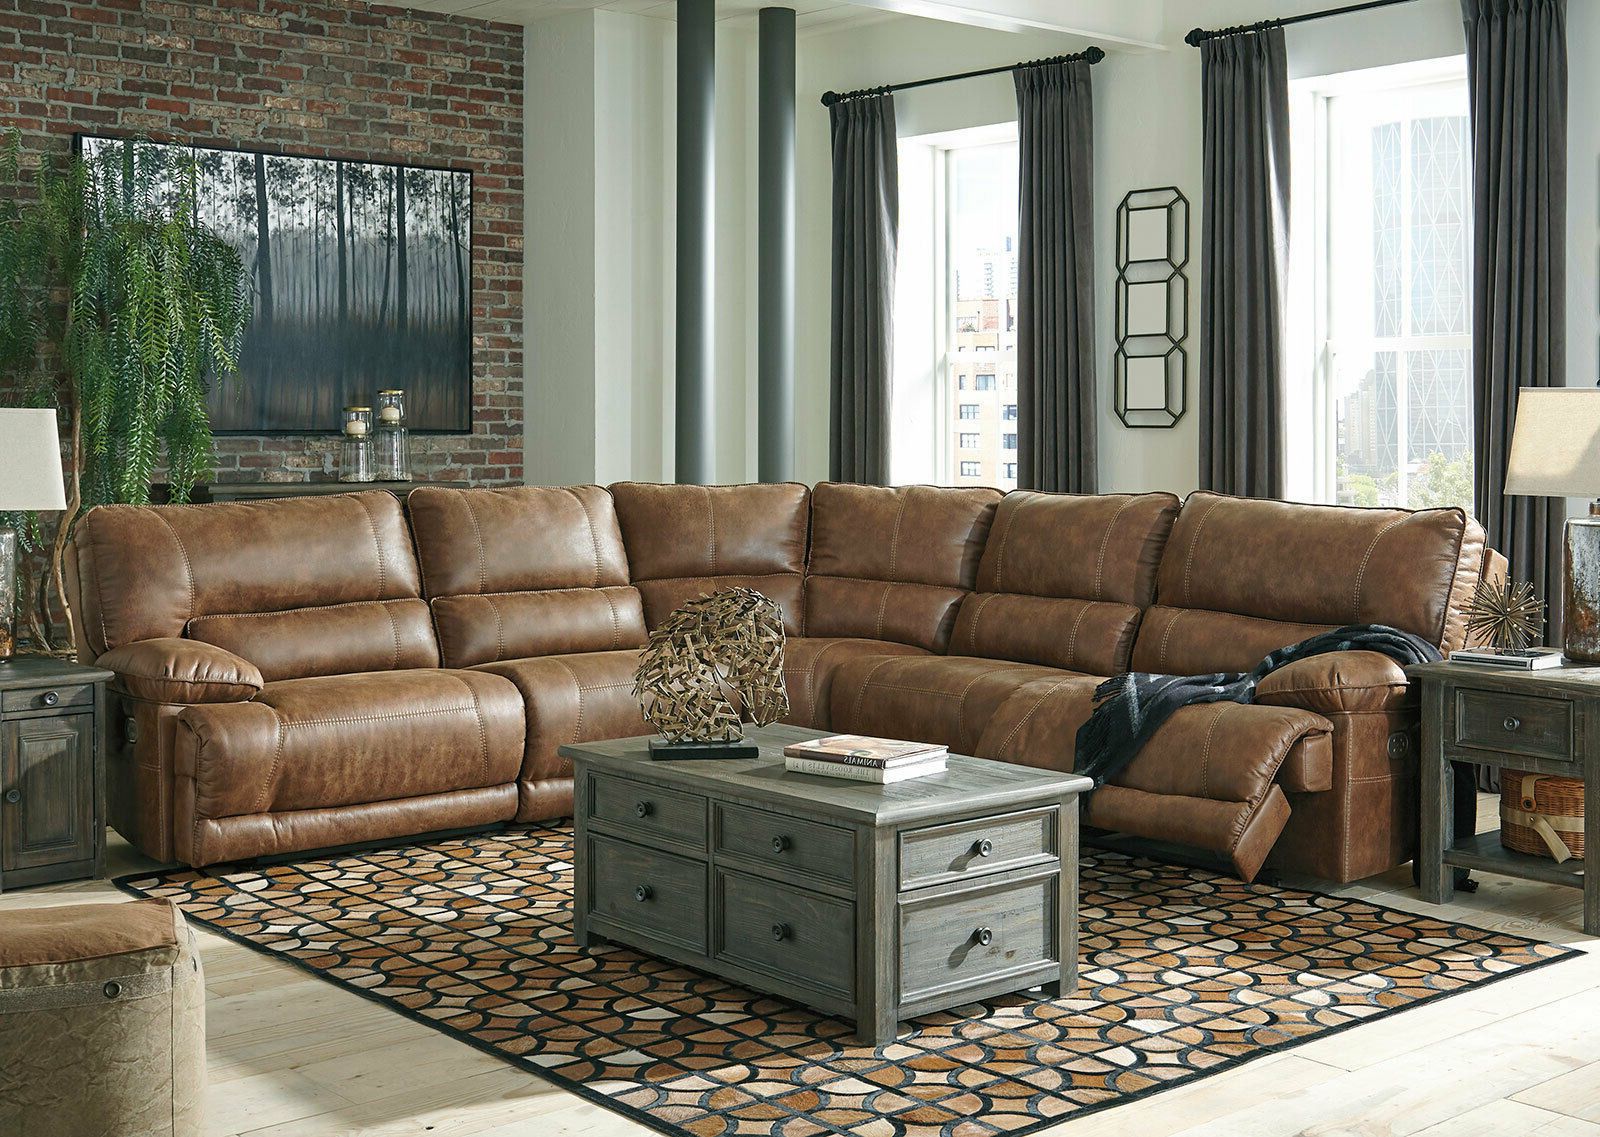 Most Recently Released Faux Leather Sofas In Chocolate Brown Inside Hamburg 5pcs Sectional Living Room Brown Faux Leather Power Reclining (View 11 of 15)